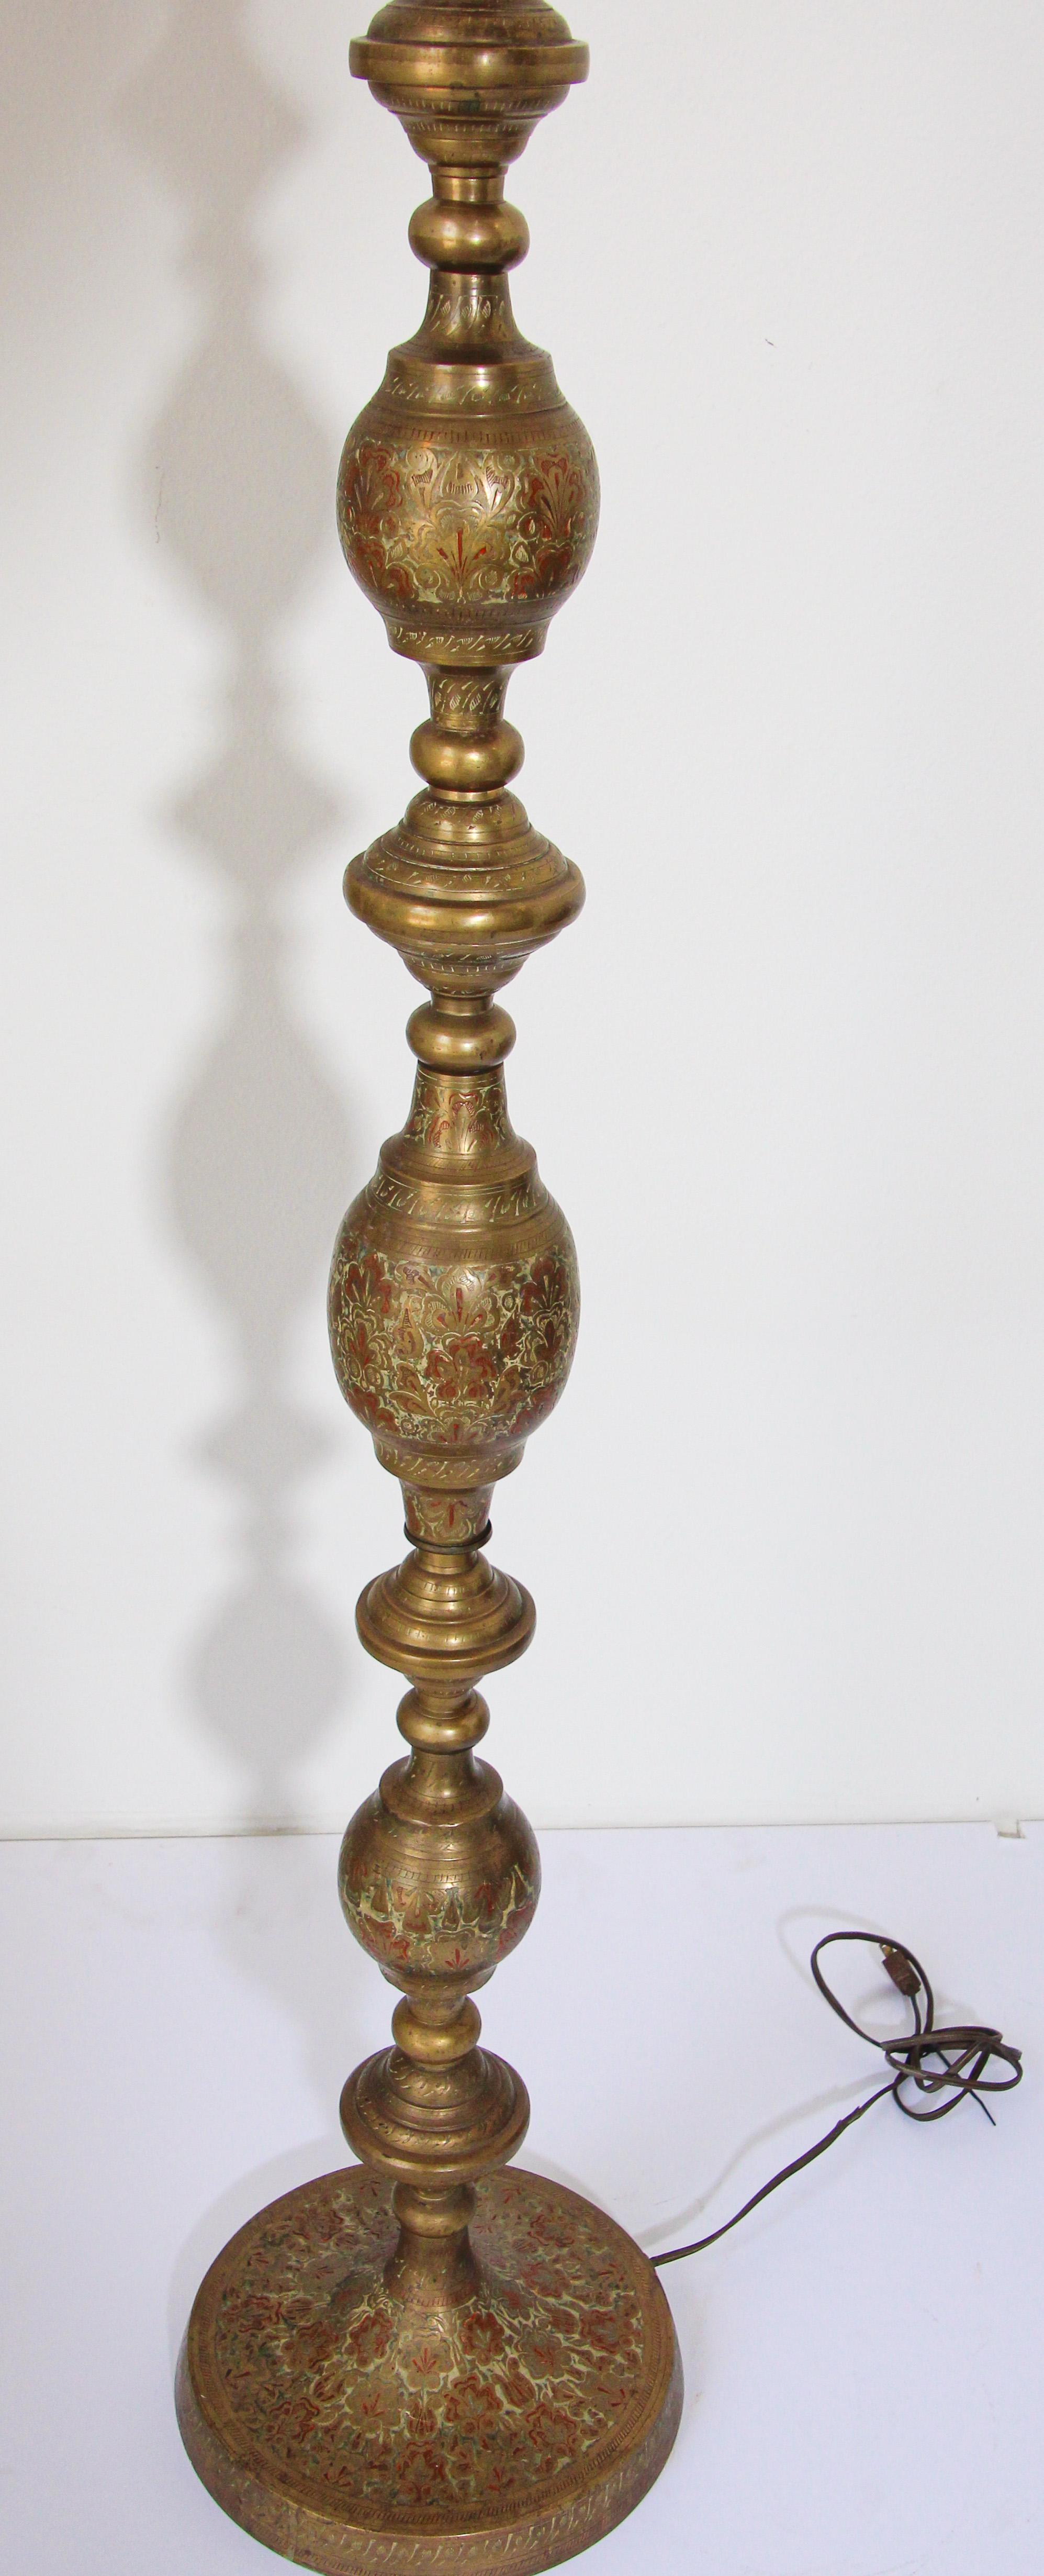 Vintage Brass and Enamel Floor Lamp Handcrafted in India 10